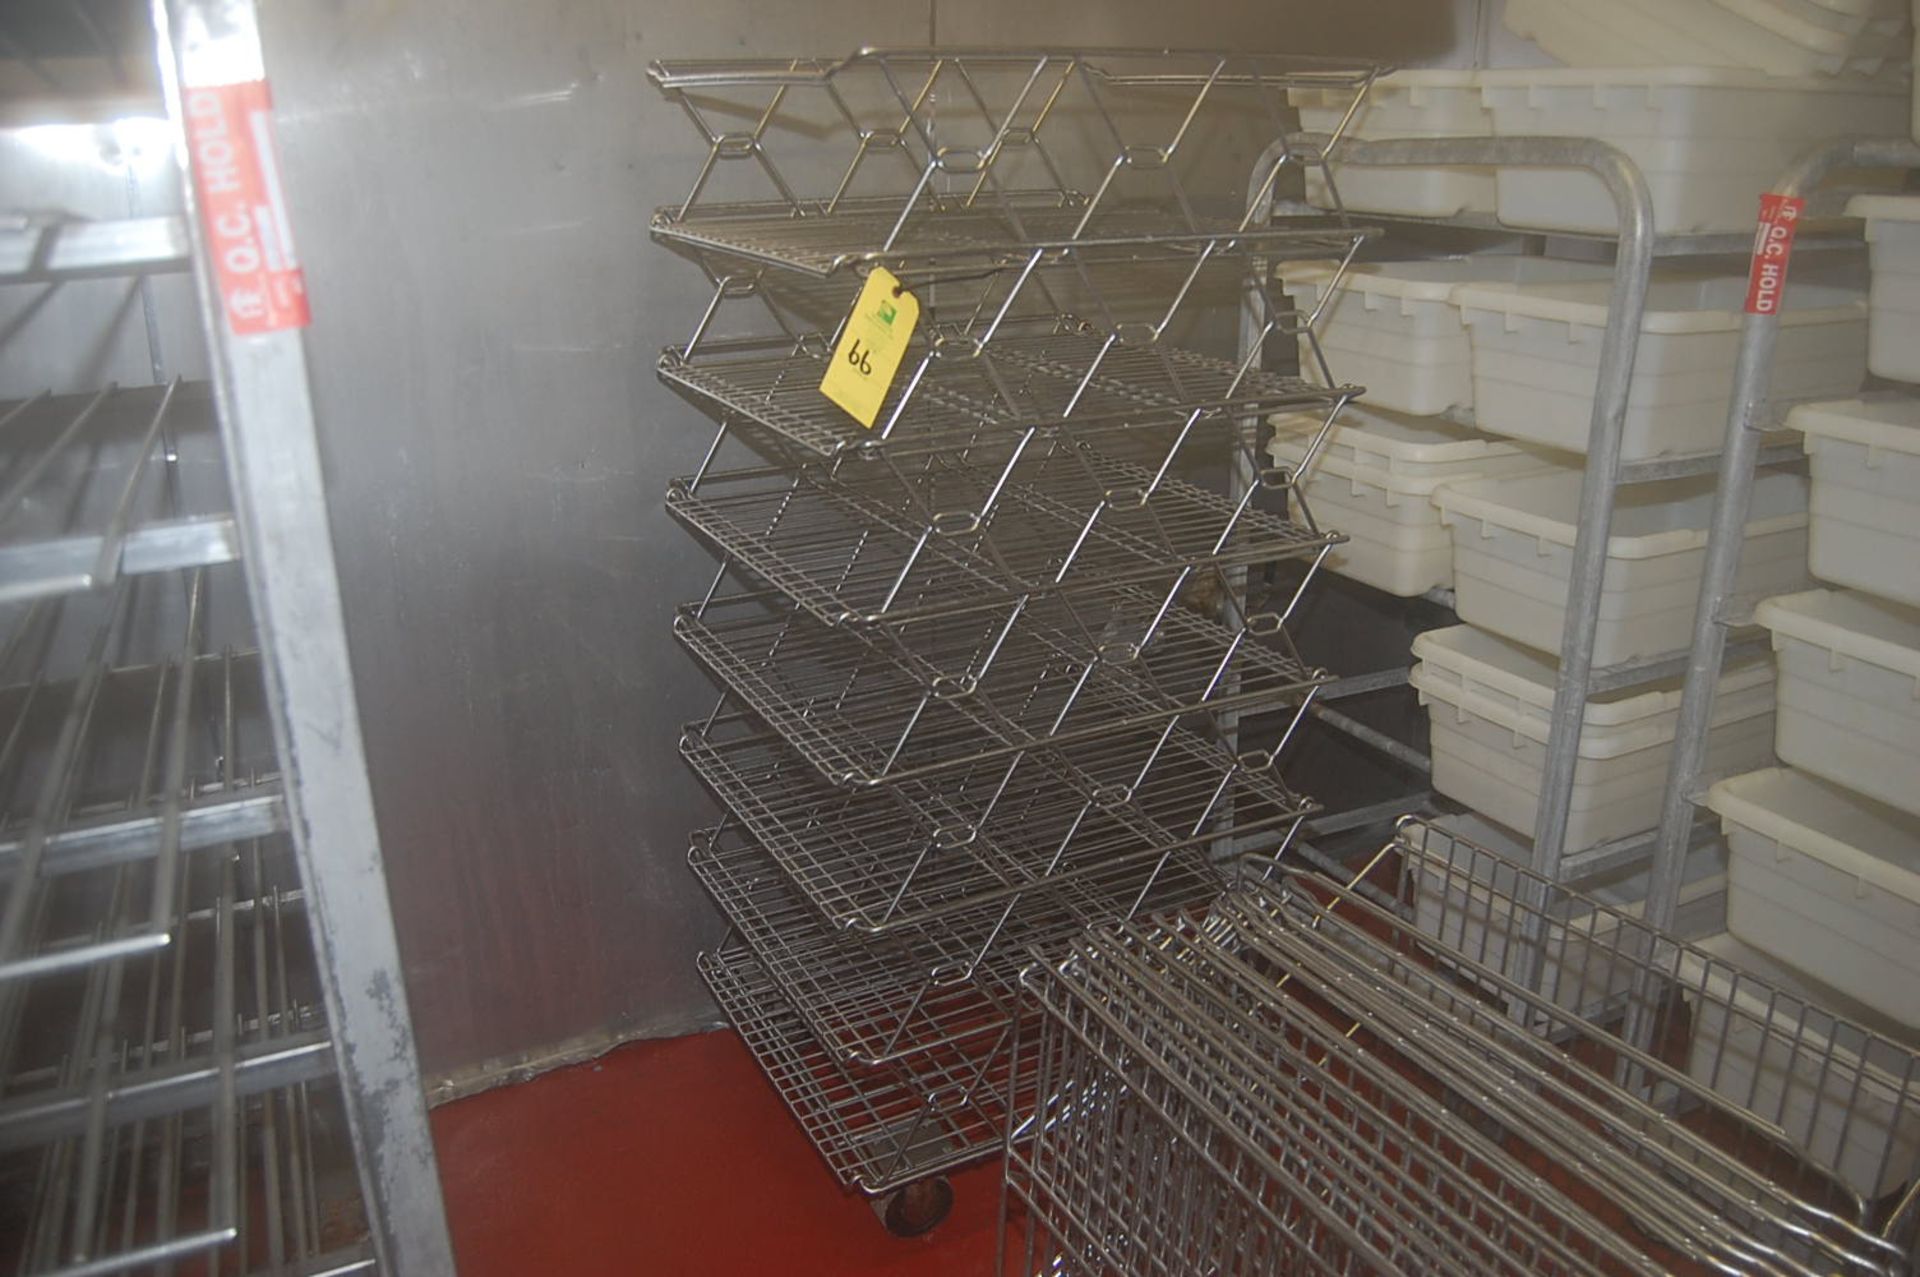 Stainless Steel Wire Shelf Unit Mounted on 4-Wheel Cart, Includes SS Wire Shelves, RIGGING FEE: $50 - Image 2 of 2